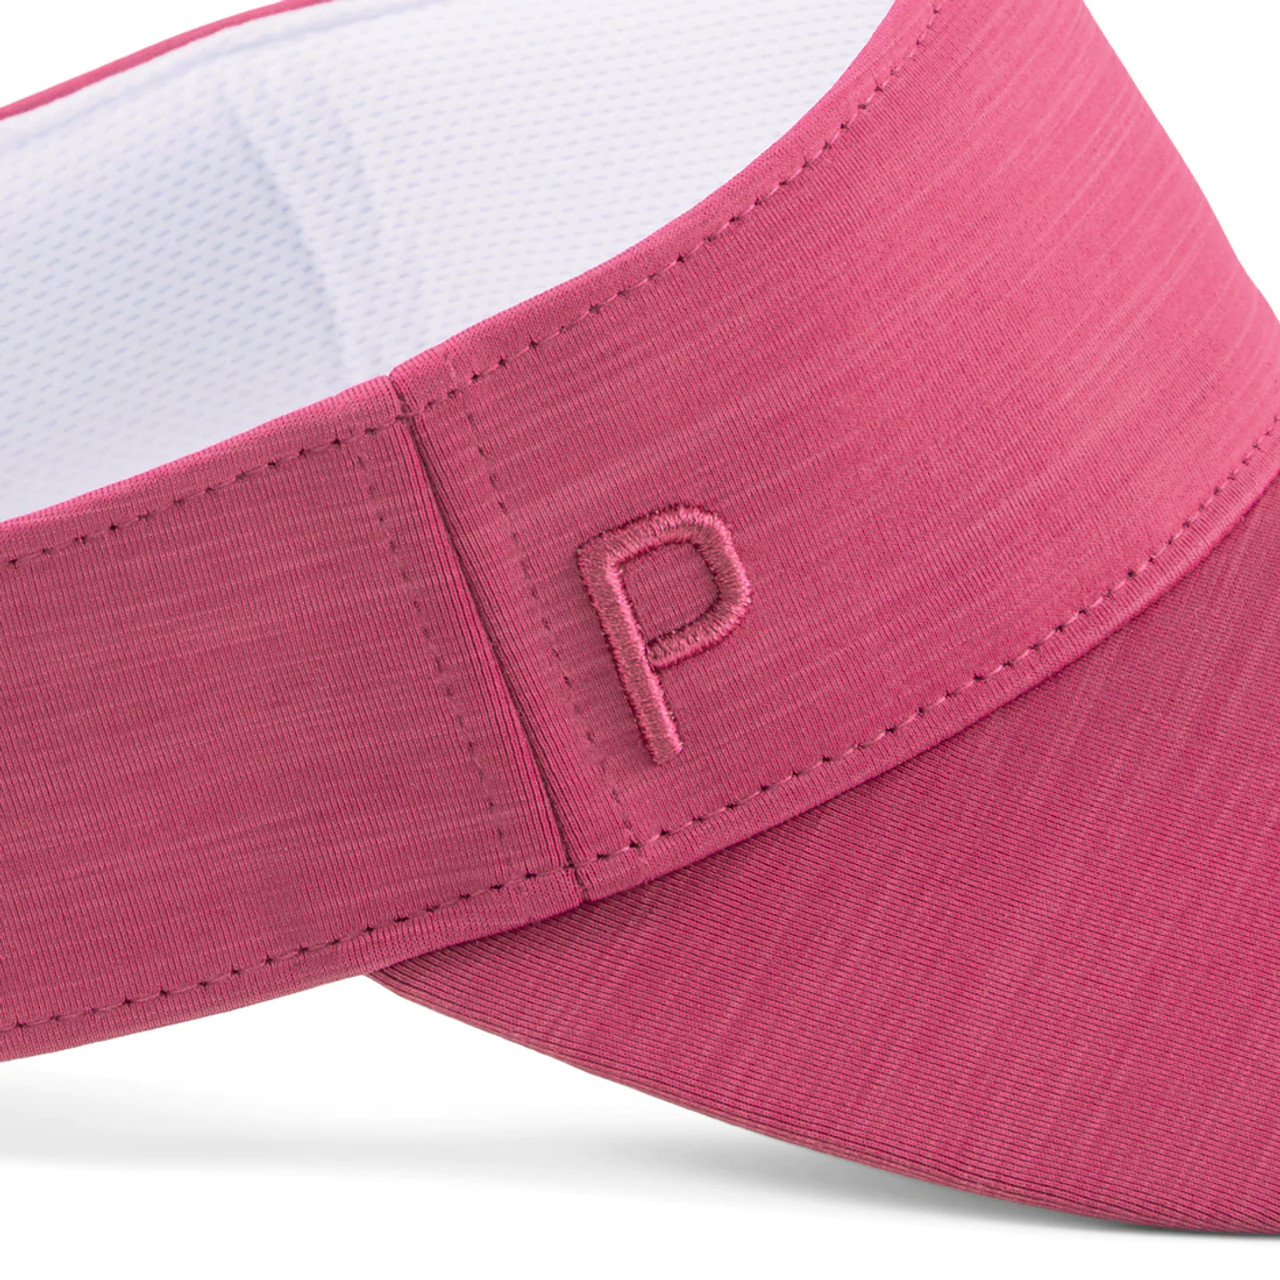 Puma Women\'s Sport P Golf Visor - Orchid Shadow - Fore Ladies - Golf  Dresses and Clothes, Tennis Skirts and Outfits, and Fashionable Activewear